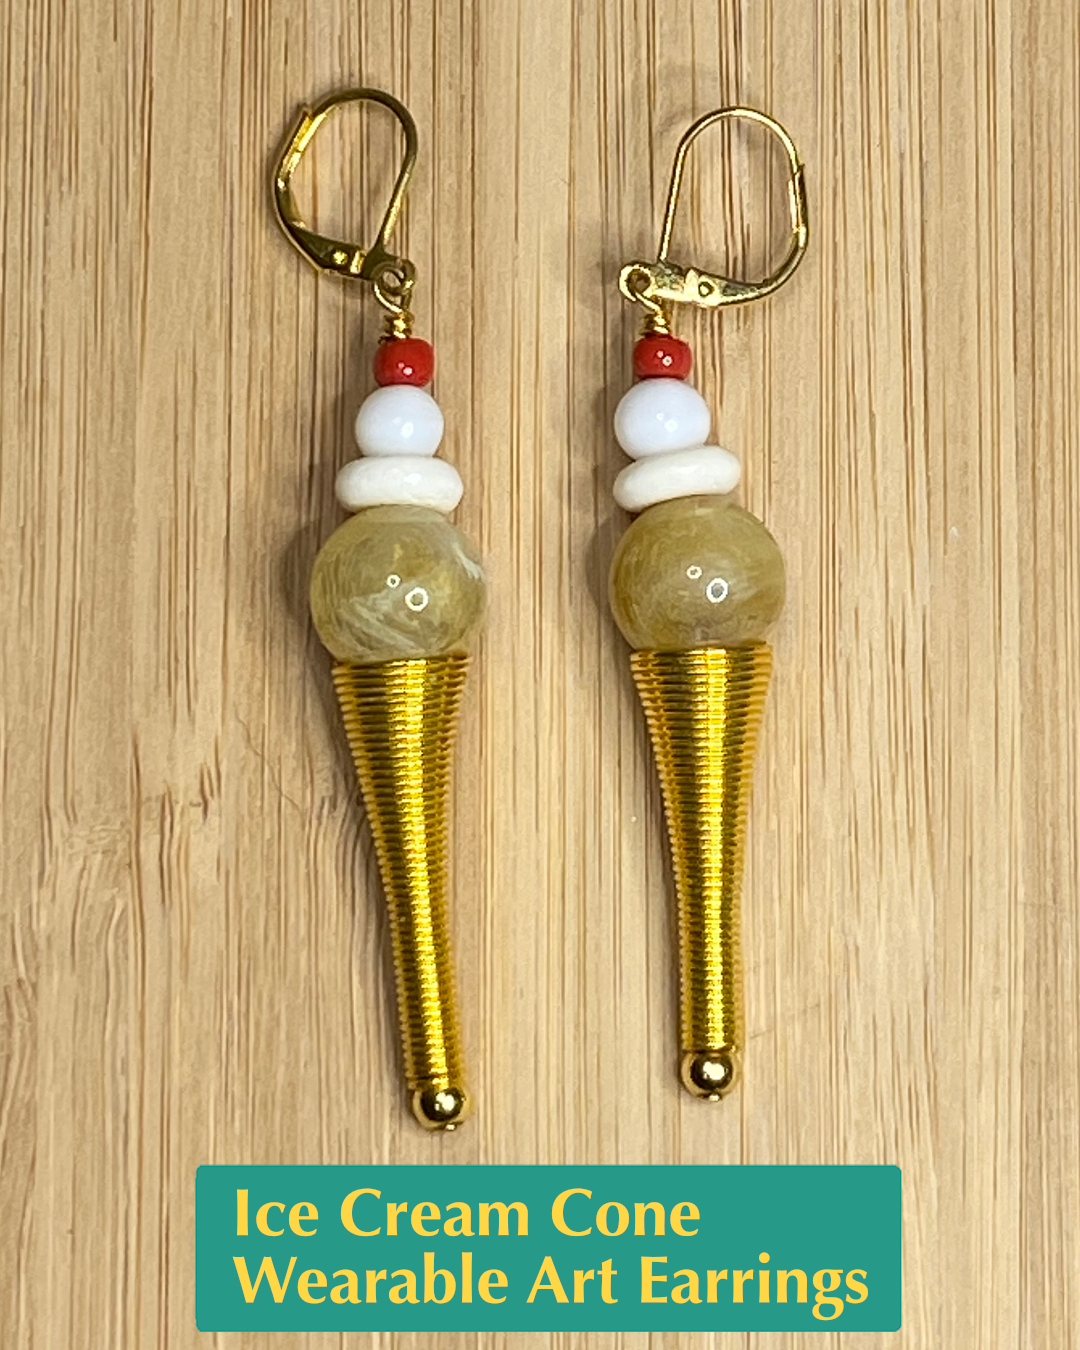 Handmade Ice cream cone shaped earrings with a gold cone, brown & white swirled ice cream scoop, whipped cream, and red cherry